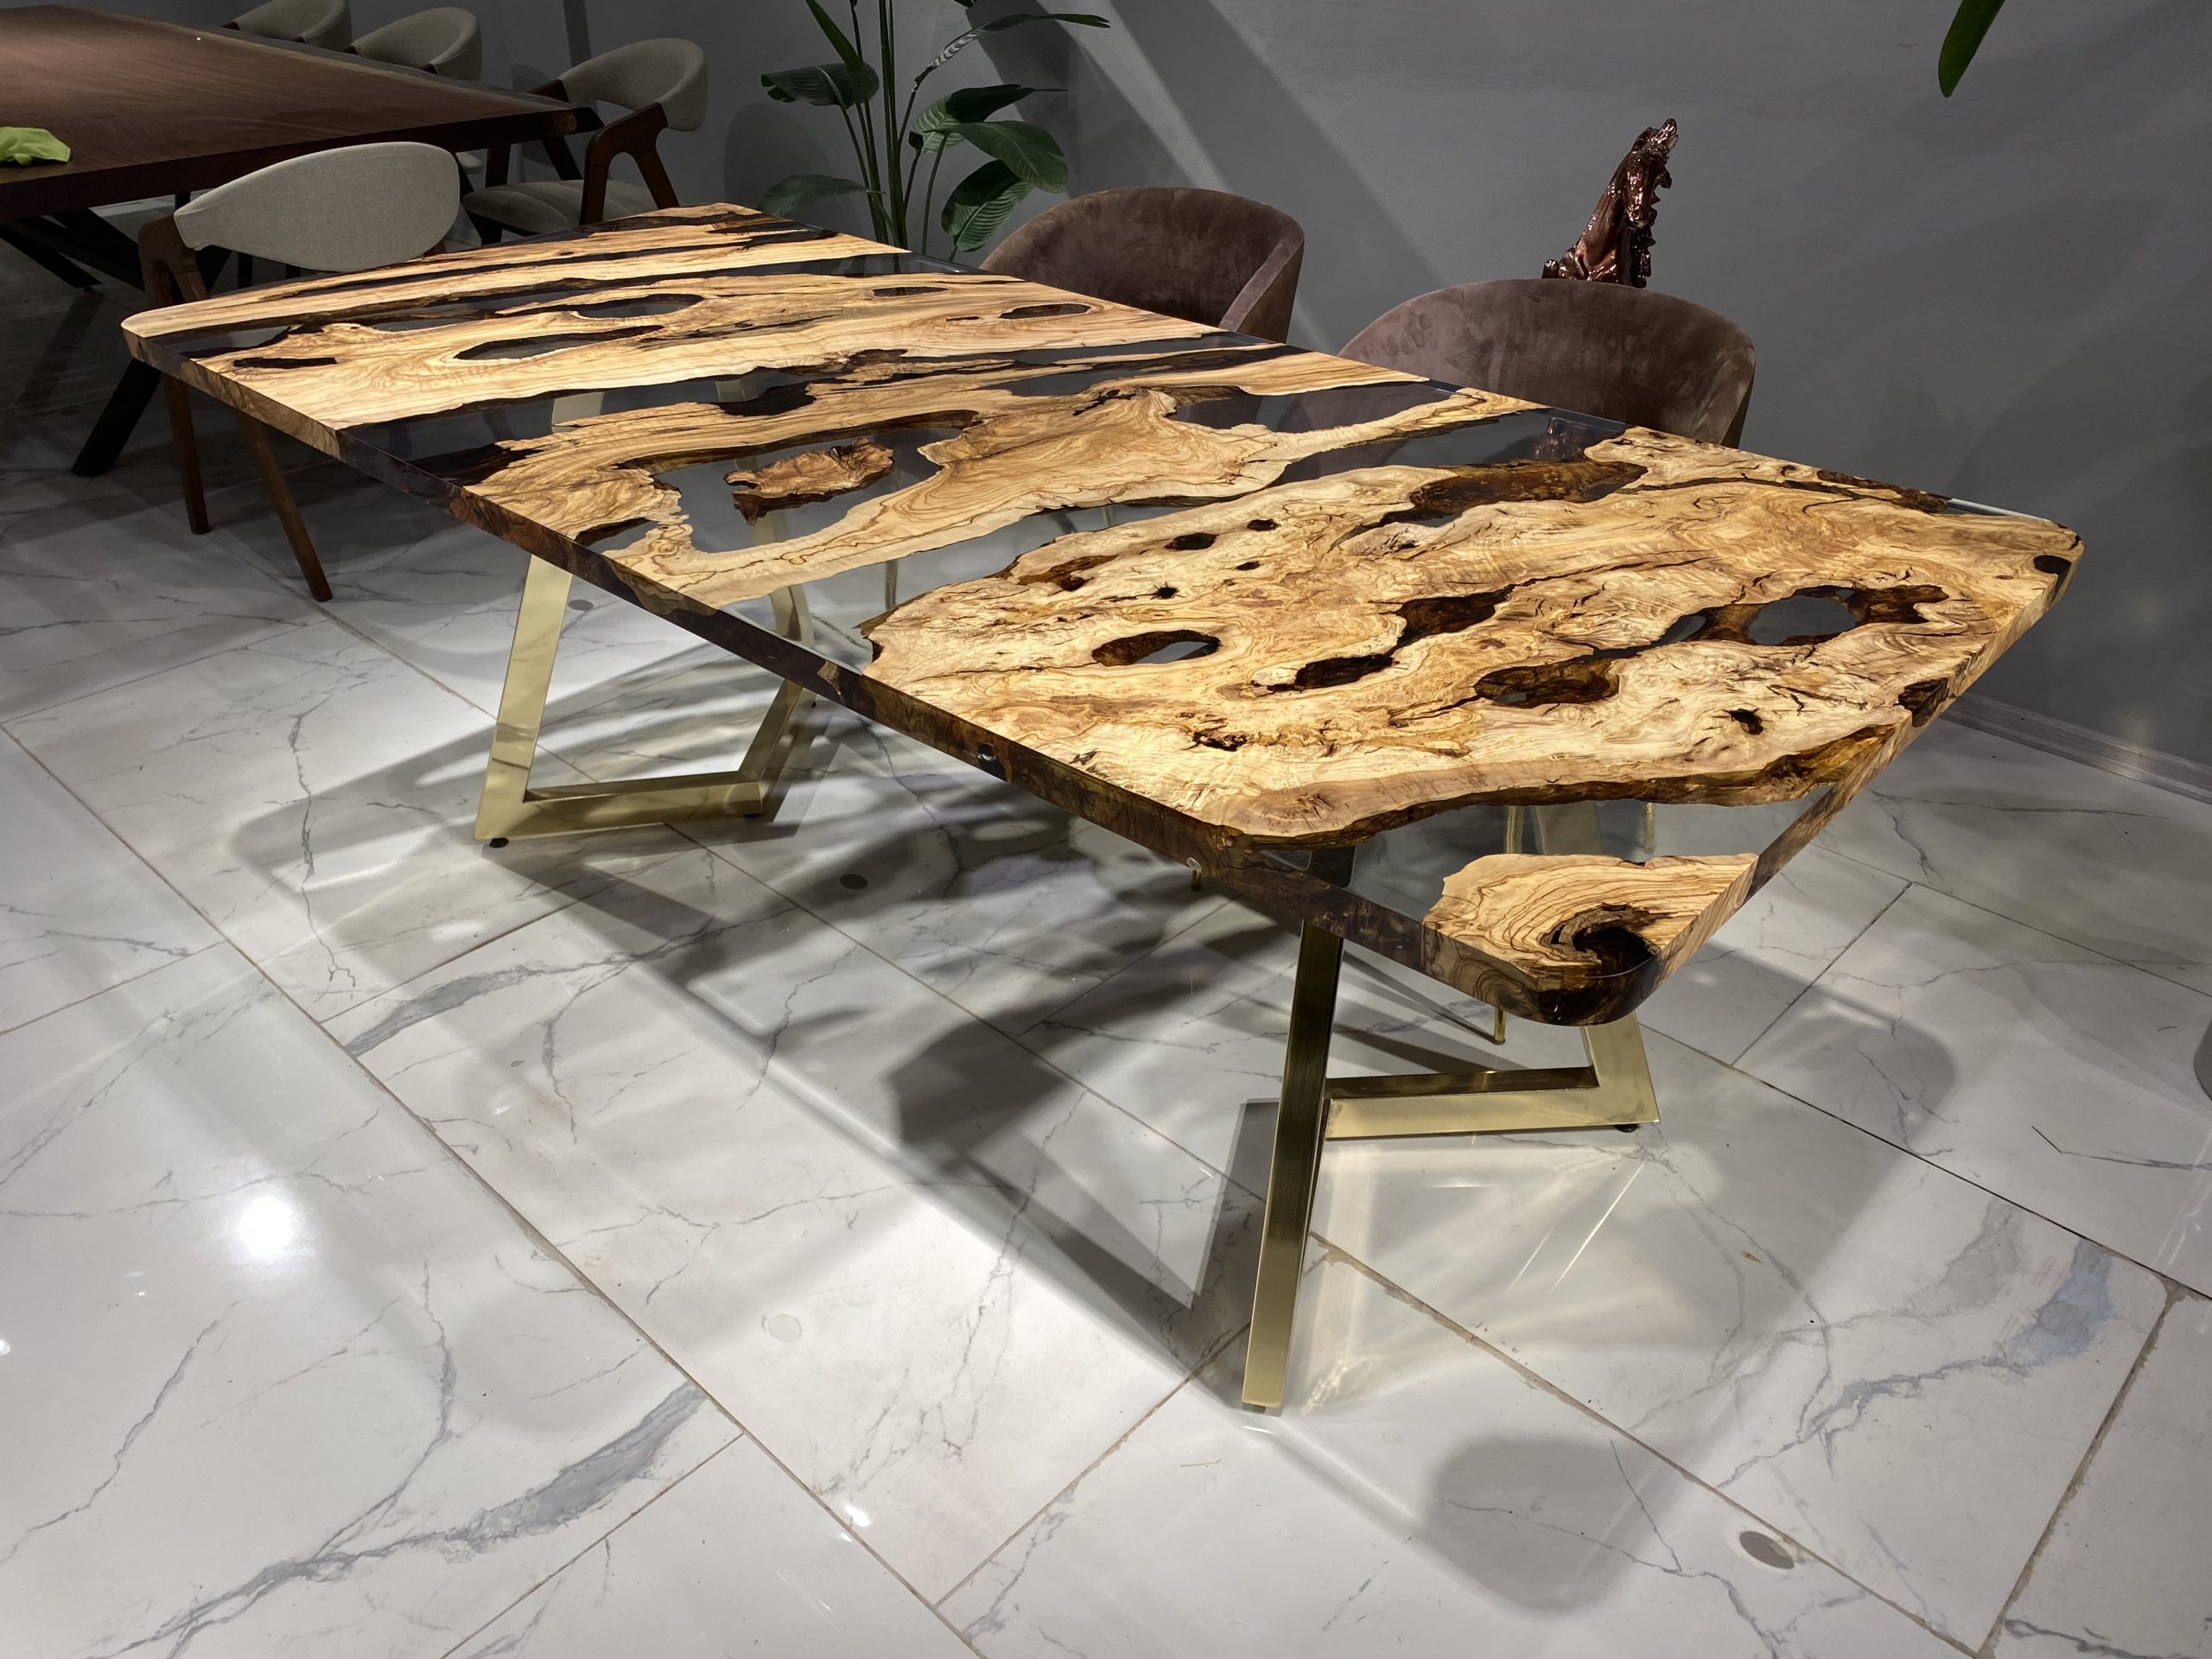 epoxy dining table, epoxy dining table austria, epoxy dining table walnut, epoxy dining table hexagon, epoxy river table, river table, river table hexagon, epoxy resin table, custom made furniture, exclusive tables, epoxy table, johannes forkl, forkl, oh my deer, omd, epoxy resin table buy, epoxy resin table buy austria, tables made of epoxy resin, epoxy tables, epoxy resin table river, epoxy resin dining table, olive wood